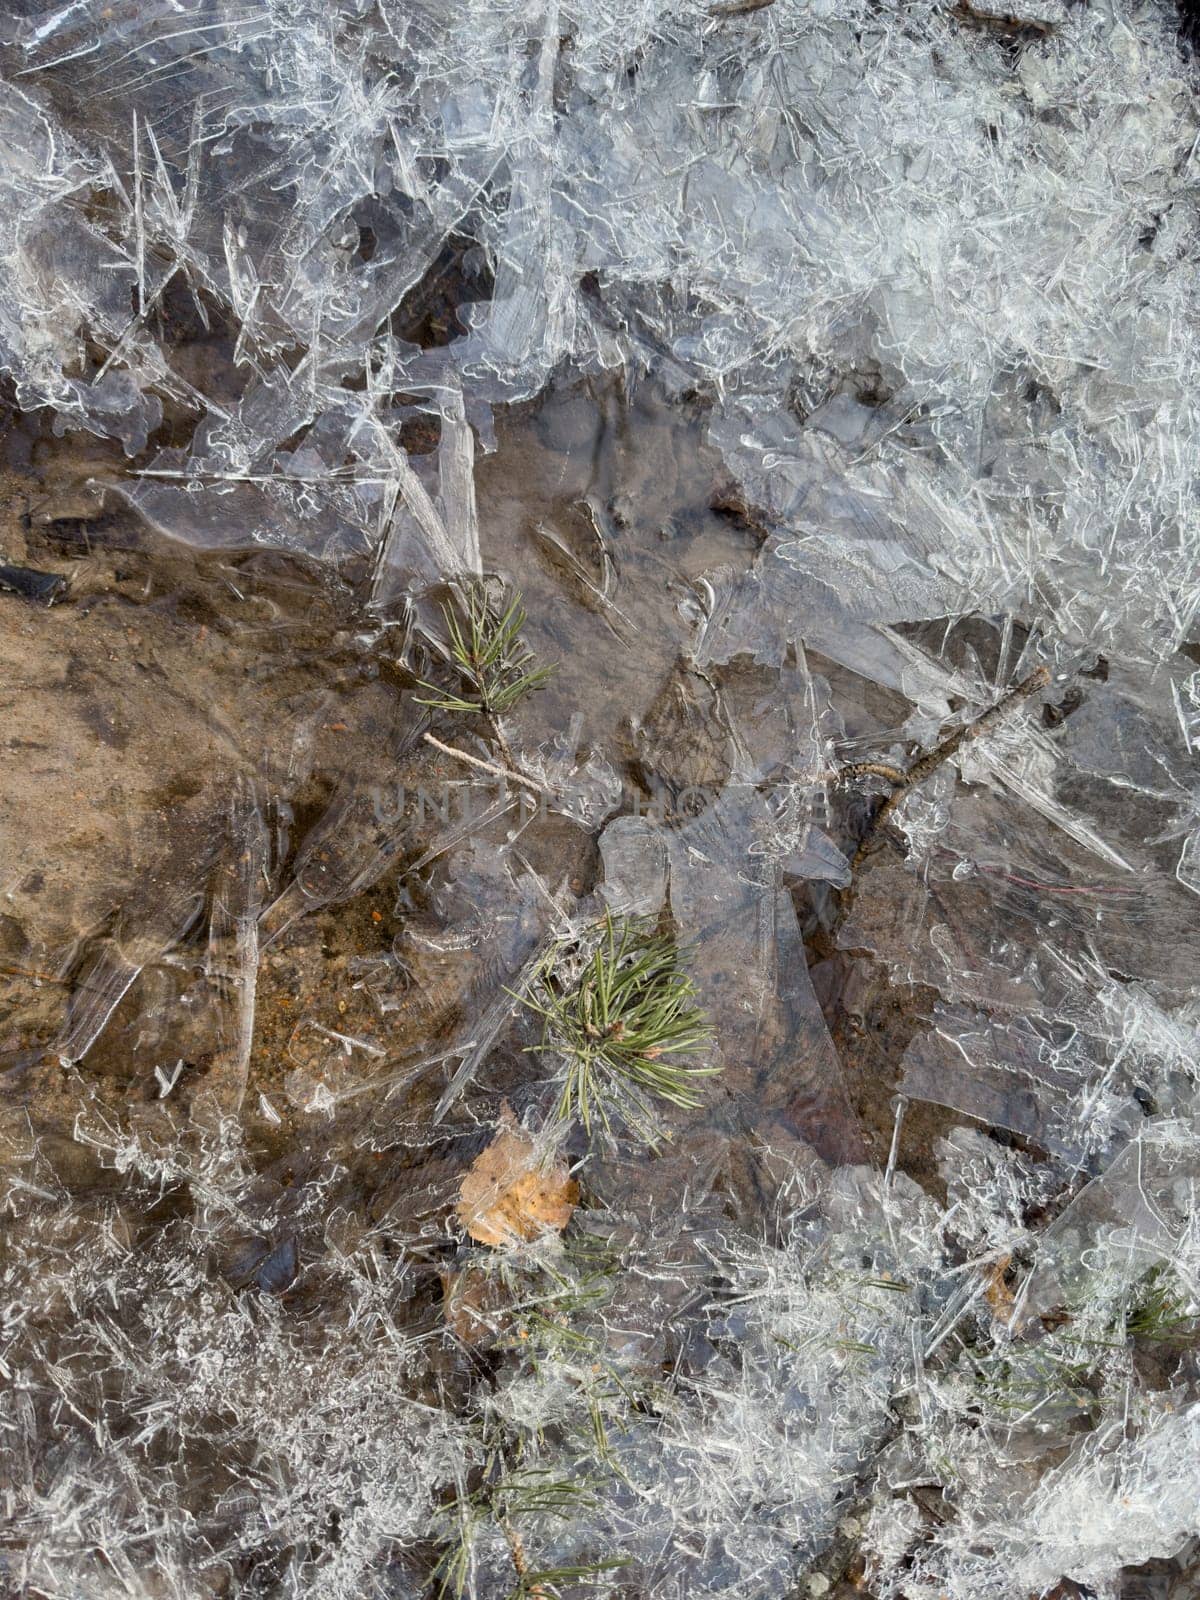 thin transparent ice on a puddle in the park on a spring day, foliage through the ice, dry grass through ice by vladimirdrozdin